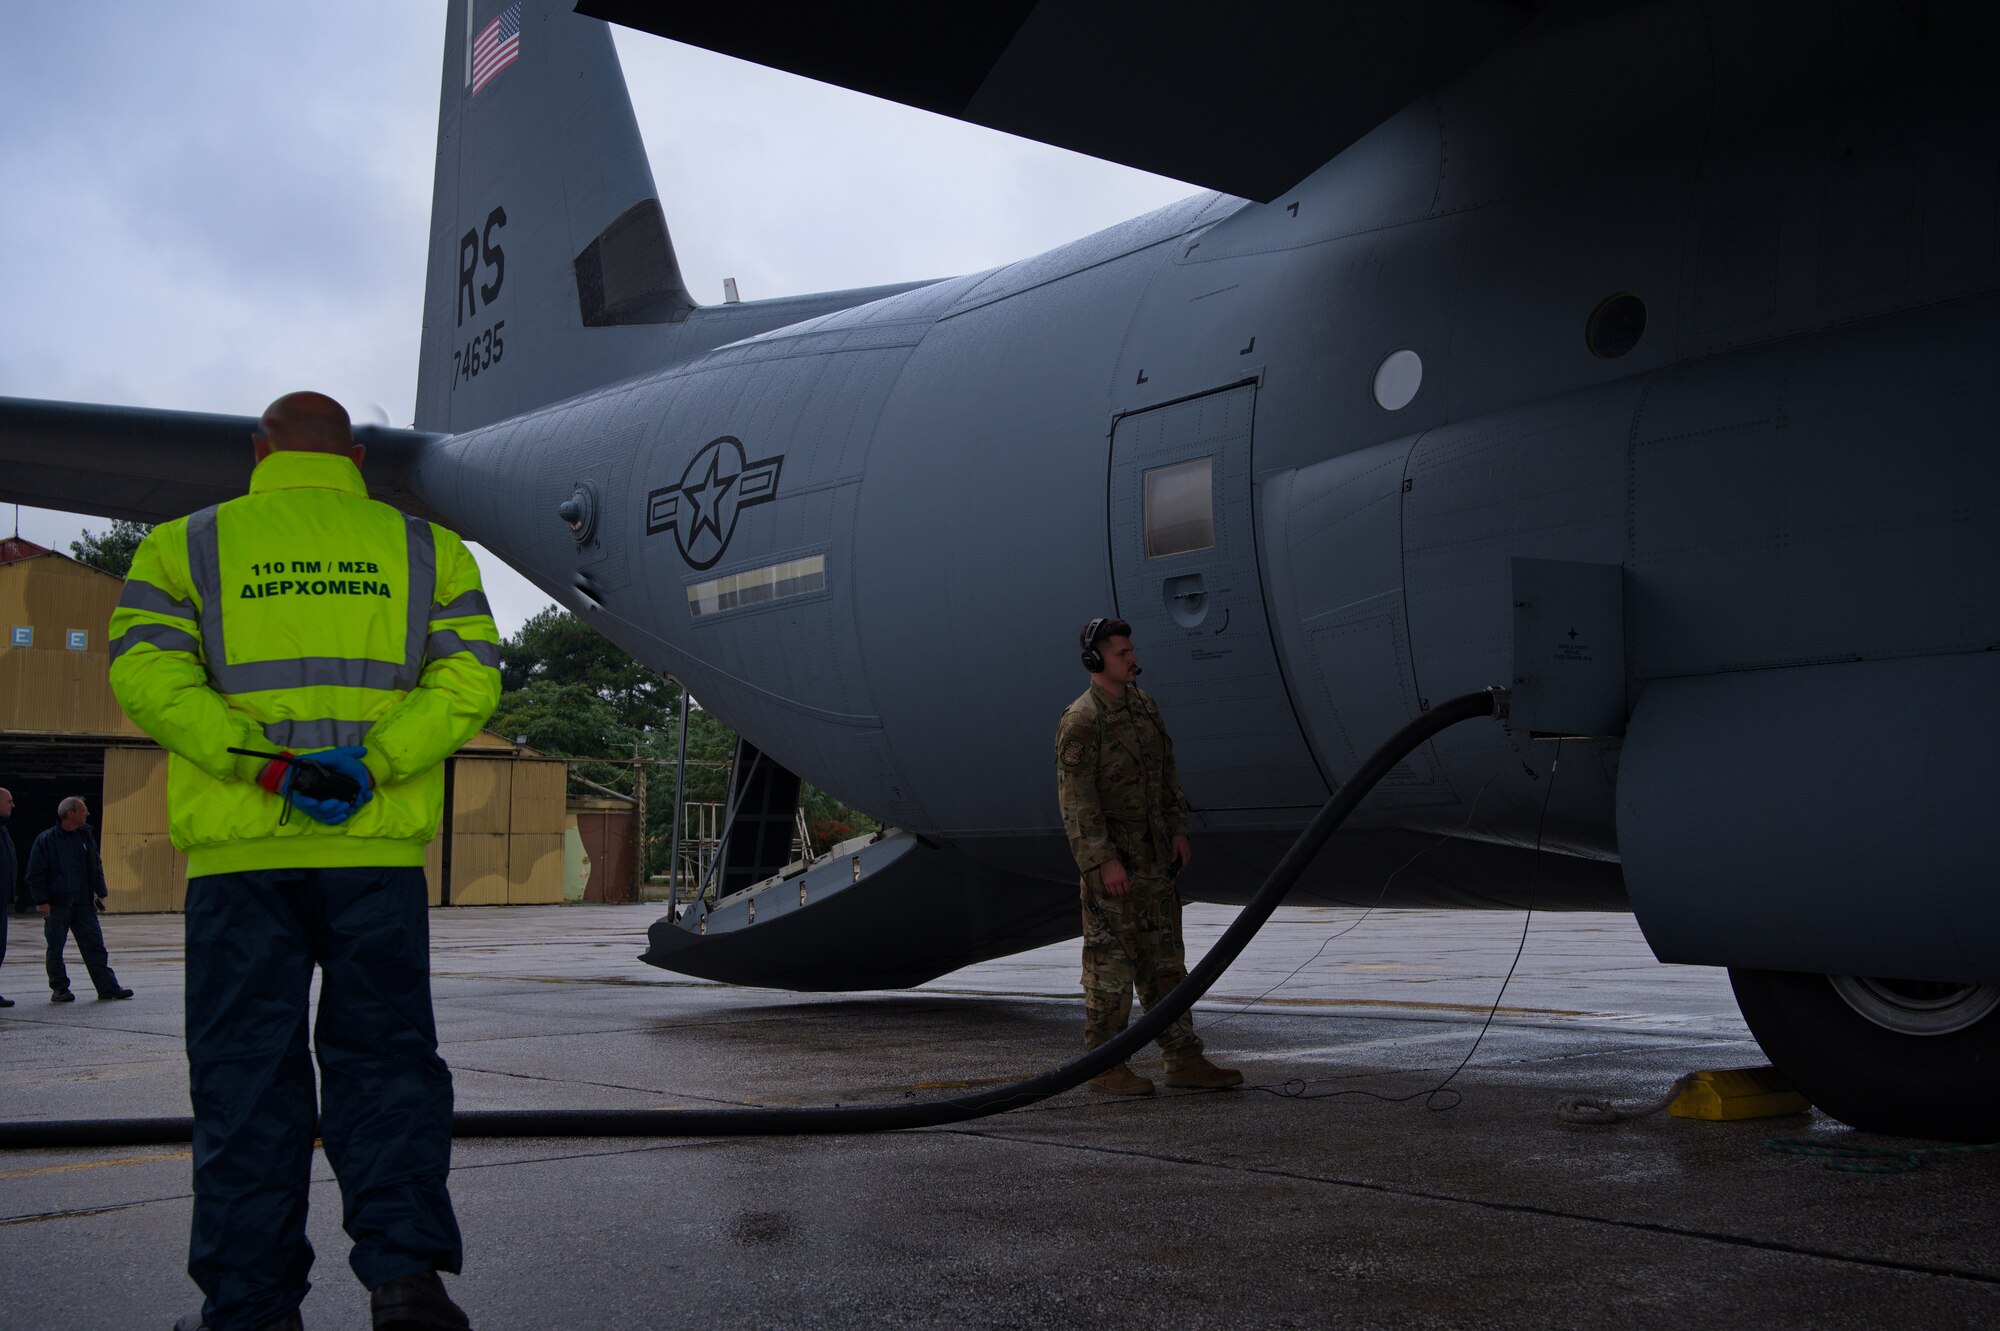 U.S. Air Force Staff Sgt. Kyle Hodge, right, 86th Aircraft Maintenance Squadron flying crew chief, monitors a C-130J Super Hercules aircraft  being refueled during Operation Castle Forge at Larissa Air Base, Greece, Oct. 15, 2021. Castle Forge is a U.S. Air Forces Europe-Air Forces Africa-led joint, multinational training event. It provides a dynamic, partnership-focused training environment, raising the U.S. commitment to collective defense in the Black Sea region while enhancing interoperability alongside NATO allies. (U.S. Air Force photo by Senior Airman Branden Rae)